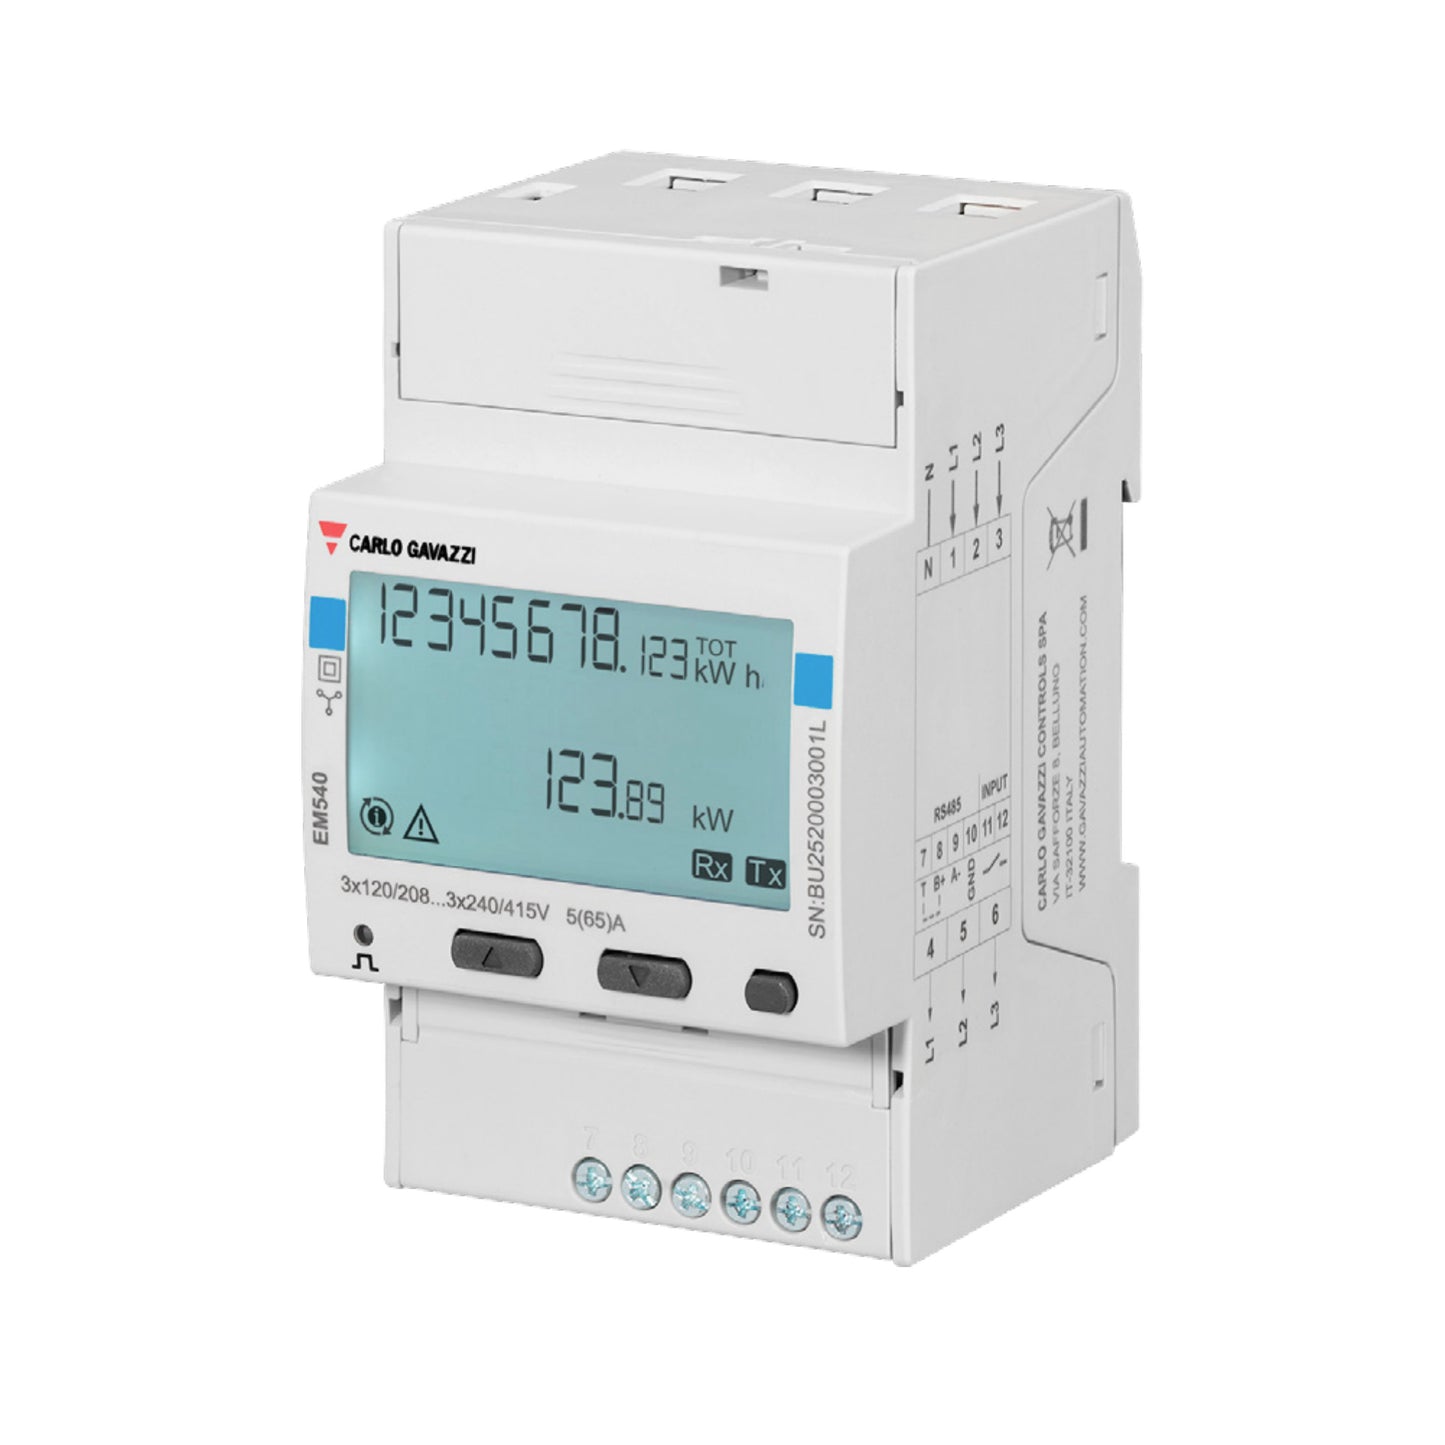 Energy meter EM540 - 3 phase - max 65A/phase